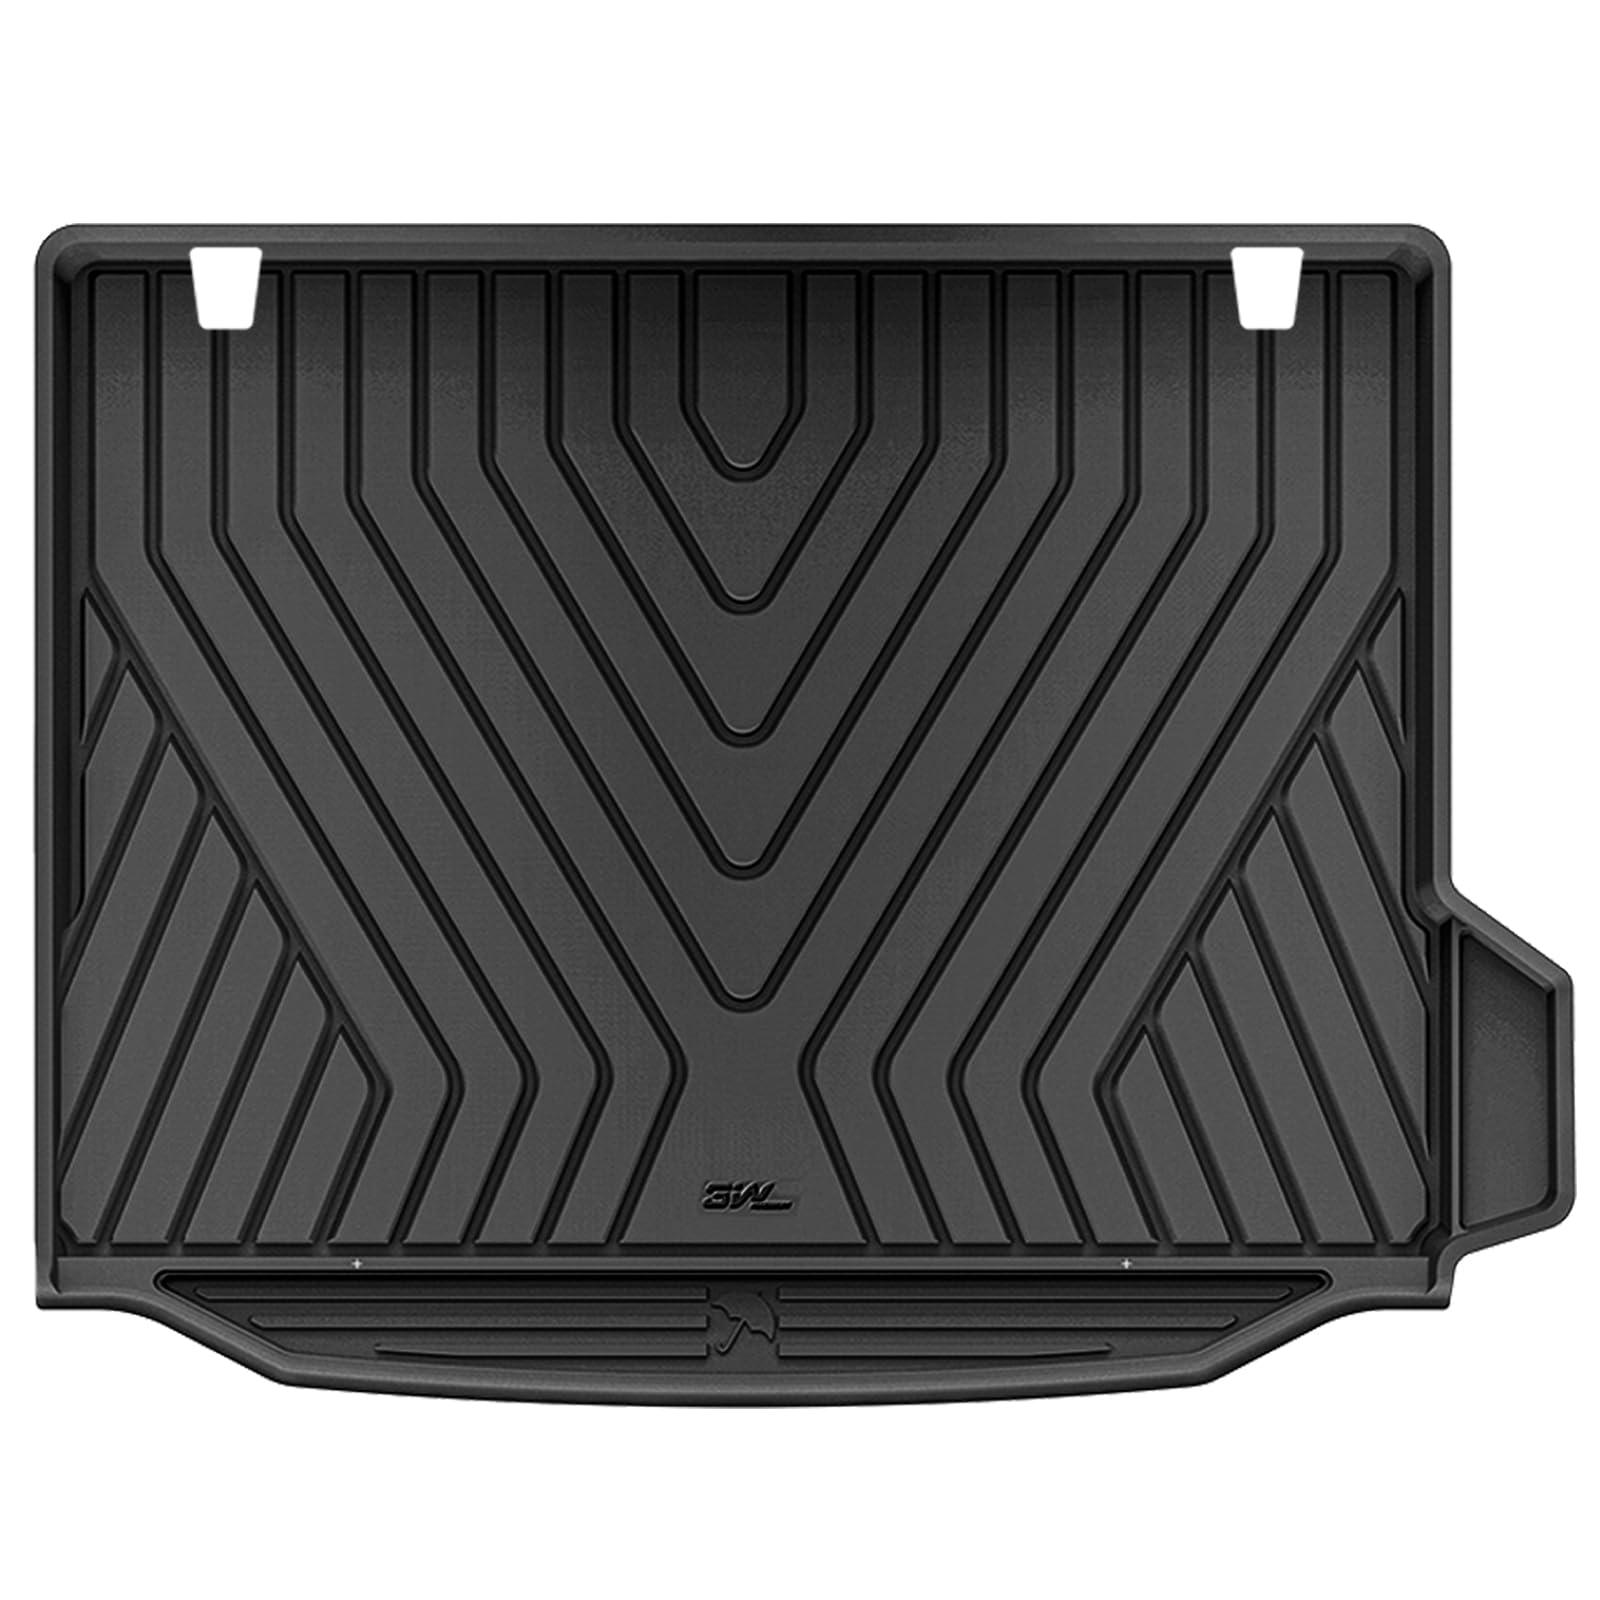 3W BMW X3 30i X3 M40i X3 30e X3 M 2018-2024 Floor Mats & Cargo Mats TPE Material & All-Weather Protection Vehicles & Parts 3Wliners 2018-2024 X3 2018-2024 Trunk Mat